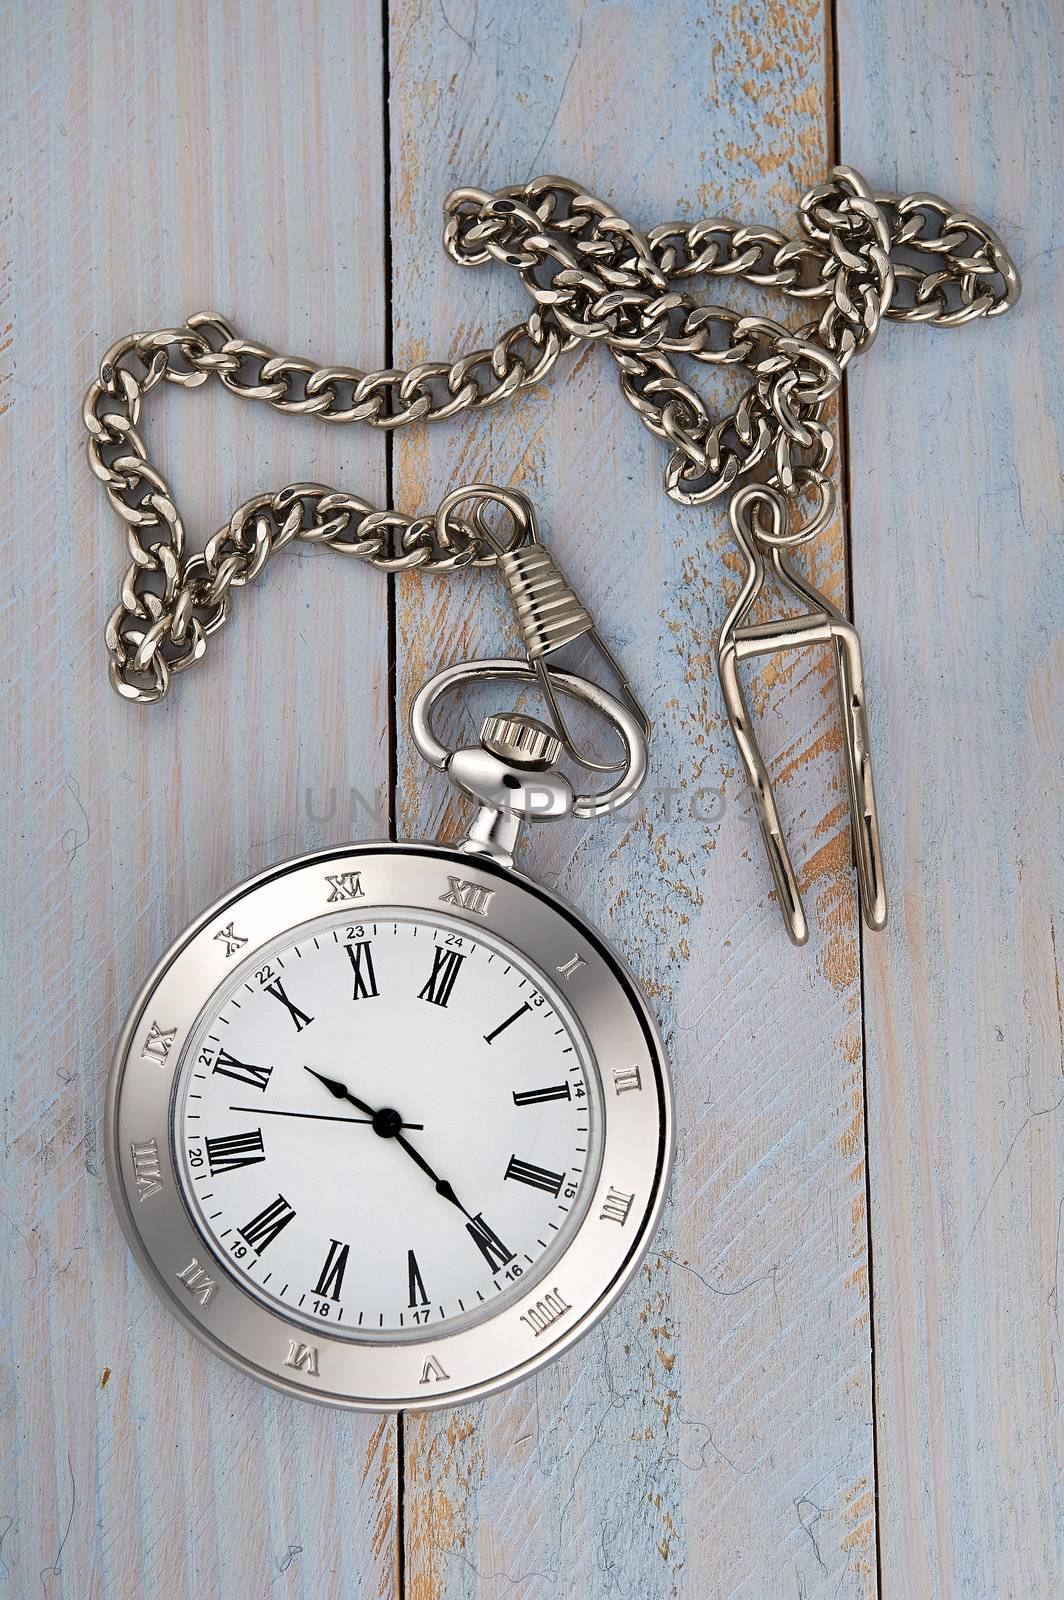 Photo of silver vintage pocket watch with chain on wooden background